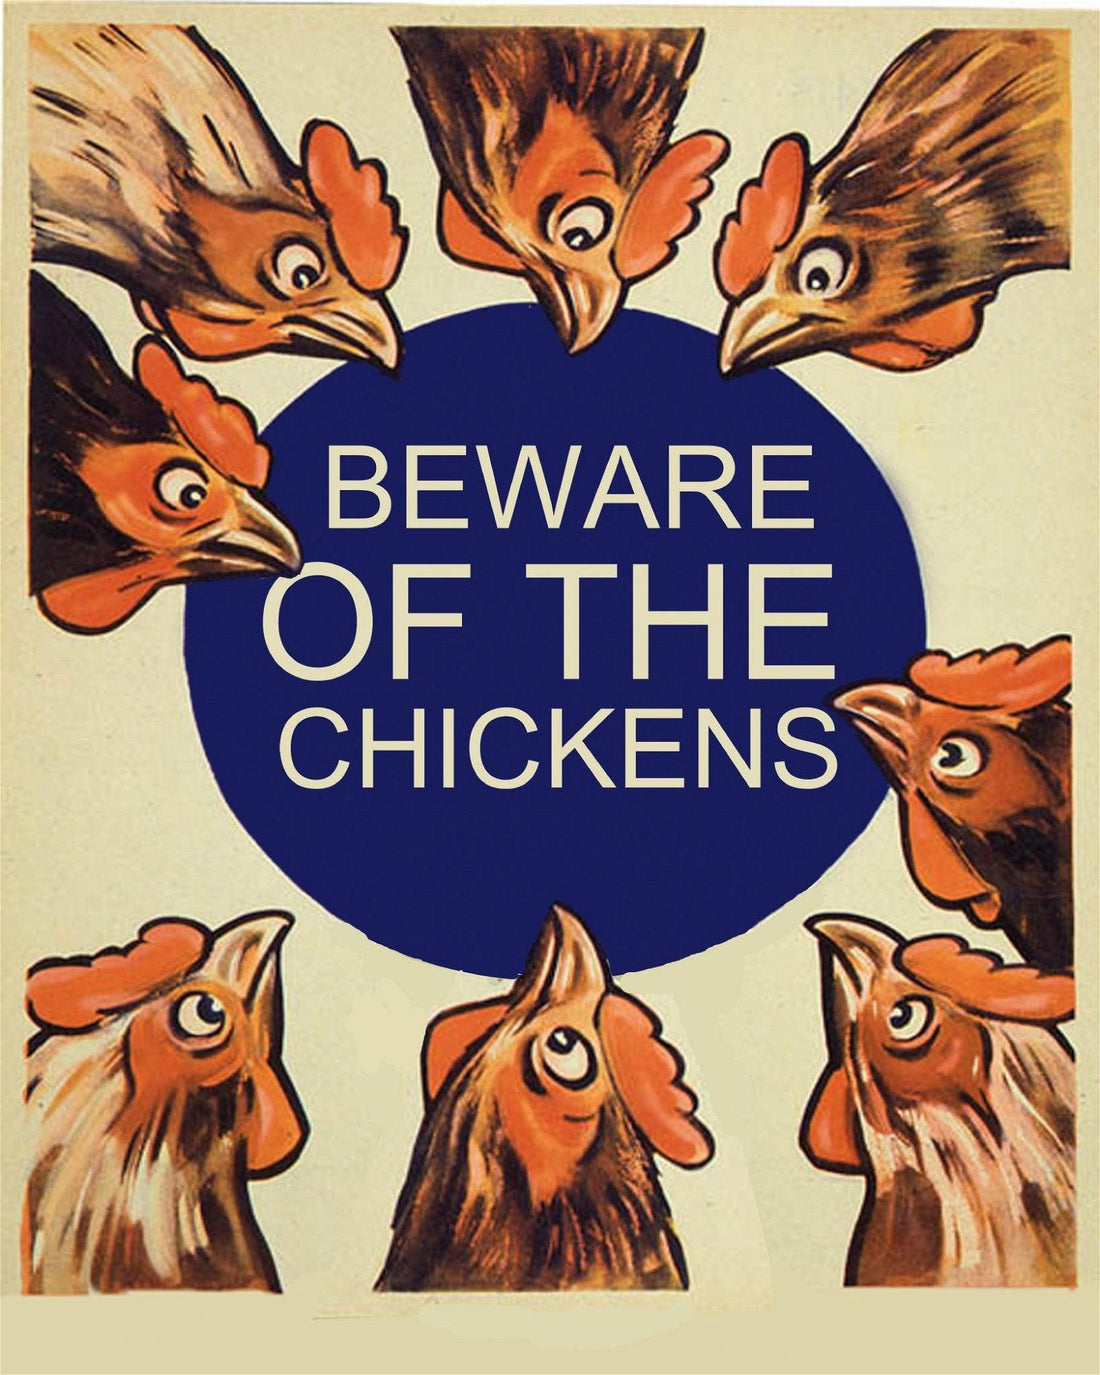 Vintage Metal Sign - Beware Of The Chickens - £27.99 - Signs & Rules 